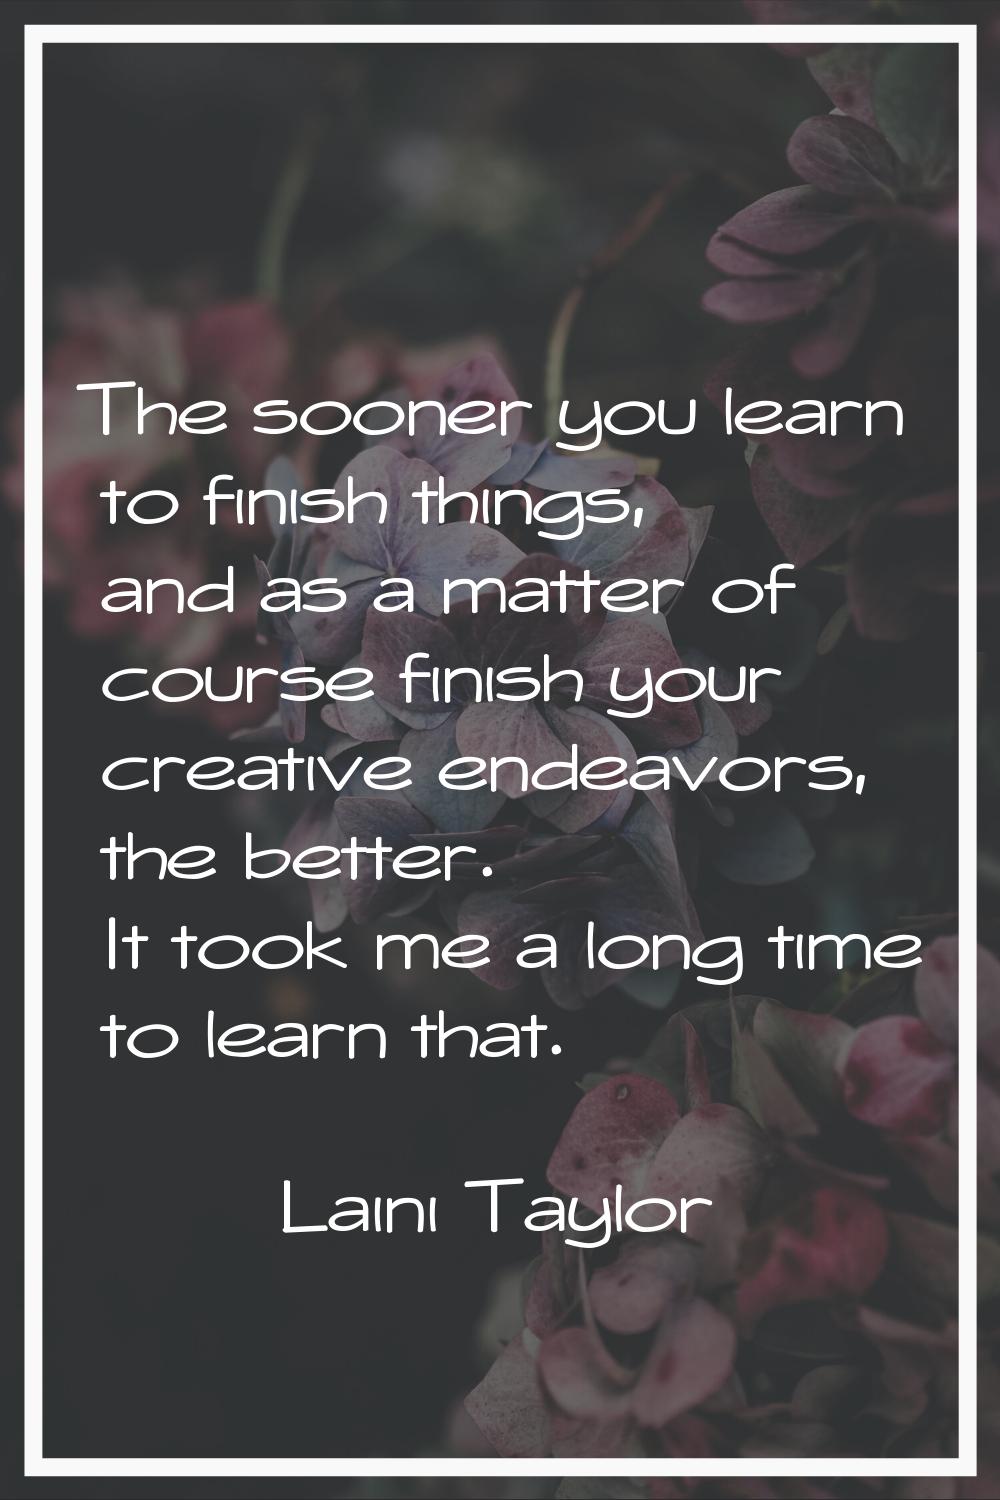 The sooner you learn to finish things, and as a matter of course finish your creative endeavors, th